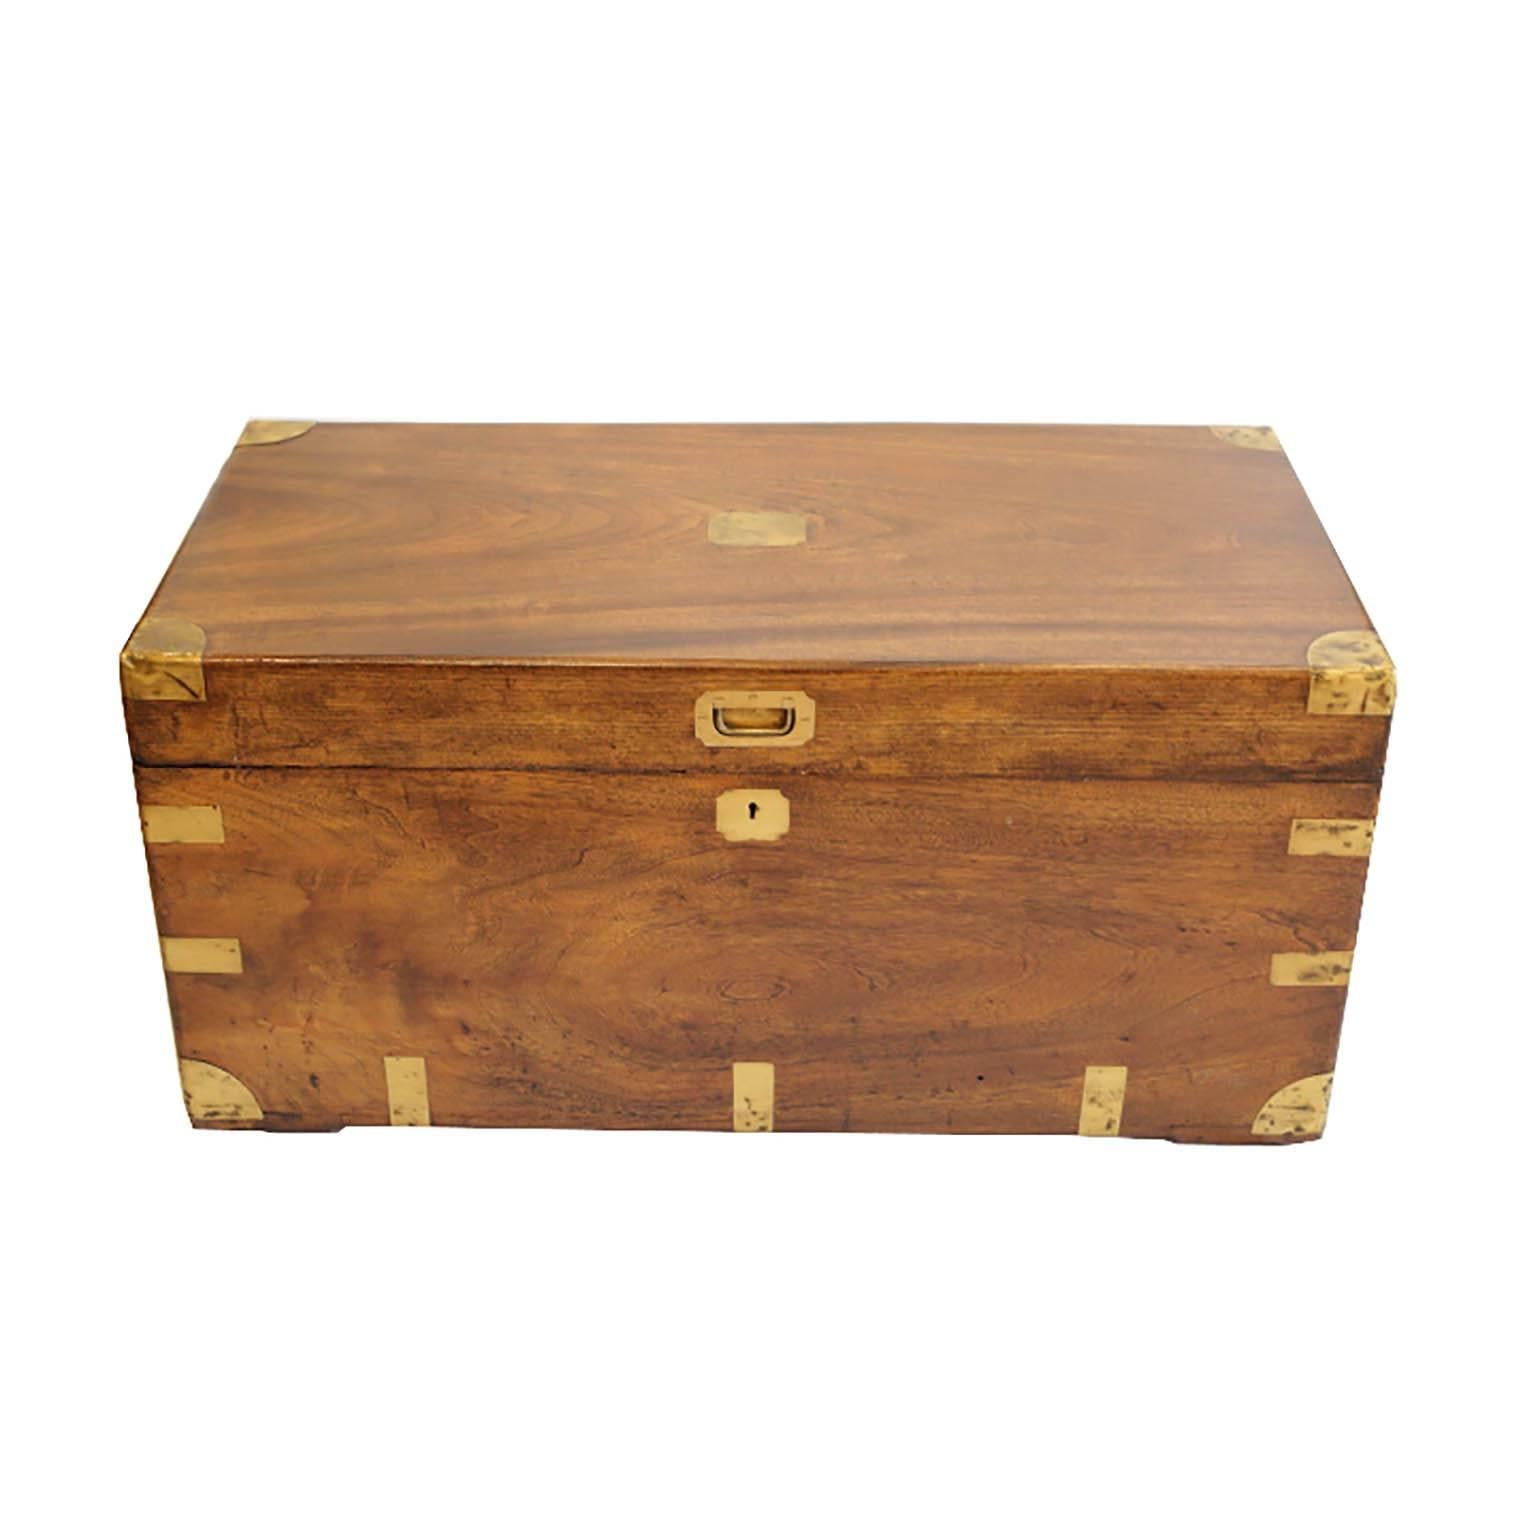 A mid-19th century military camphor wood traveling trunk.

The camphor wood trunk consists of brass trim, a plain brass plate to the top, recessed handle, and solid brass carrying handles

Missing one brass corner in the back denoted in pictures.